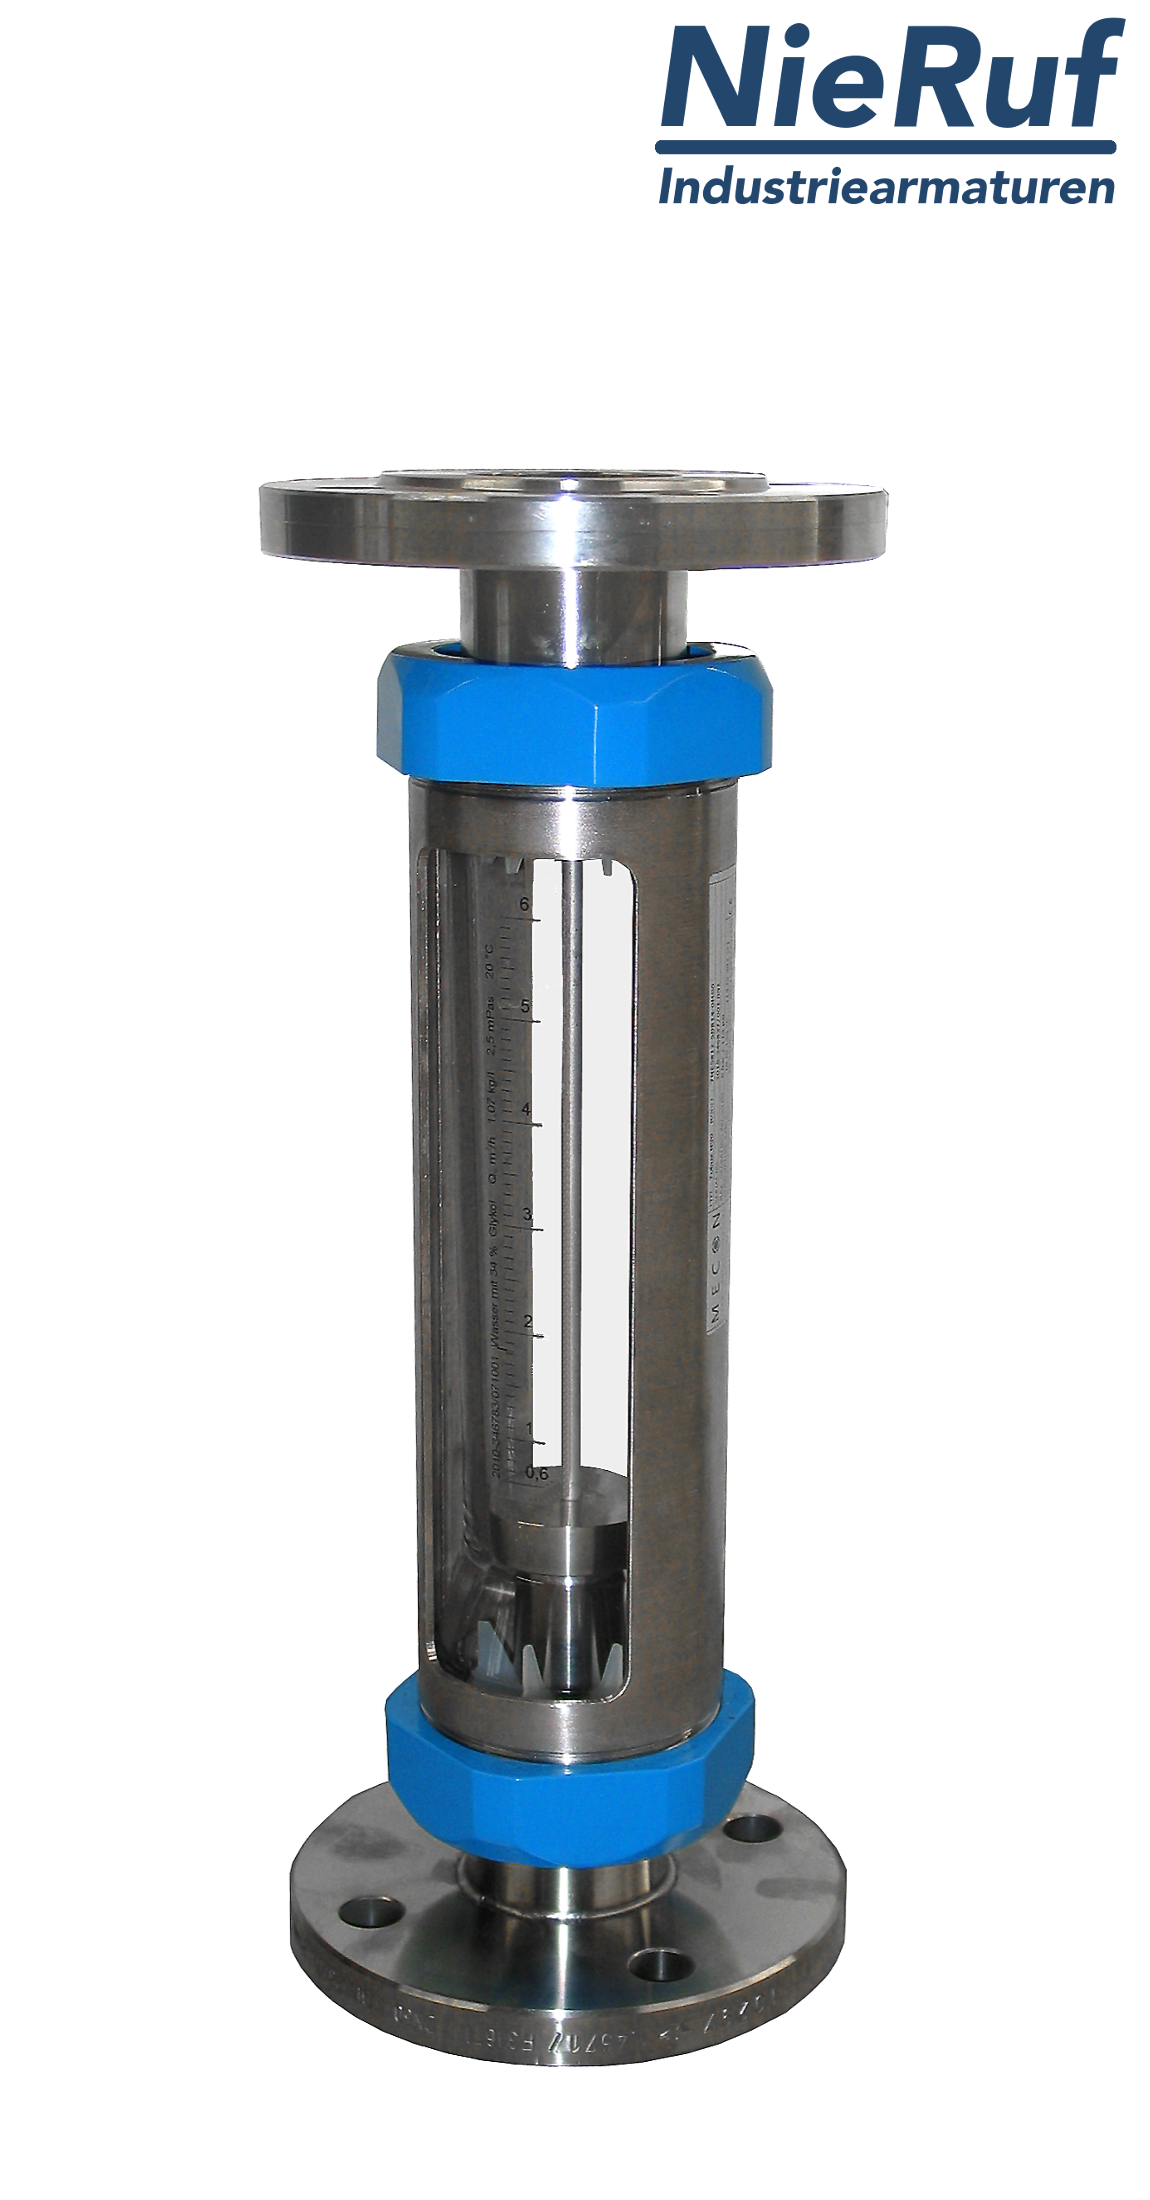 Variable area flowmeter stainless steel + borosilicate flange DN65 650.0 - 6500 l/h water FKM